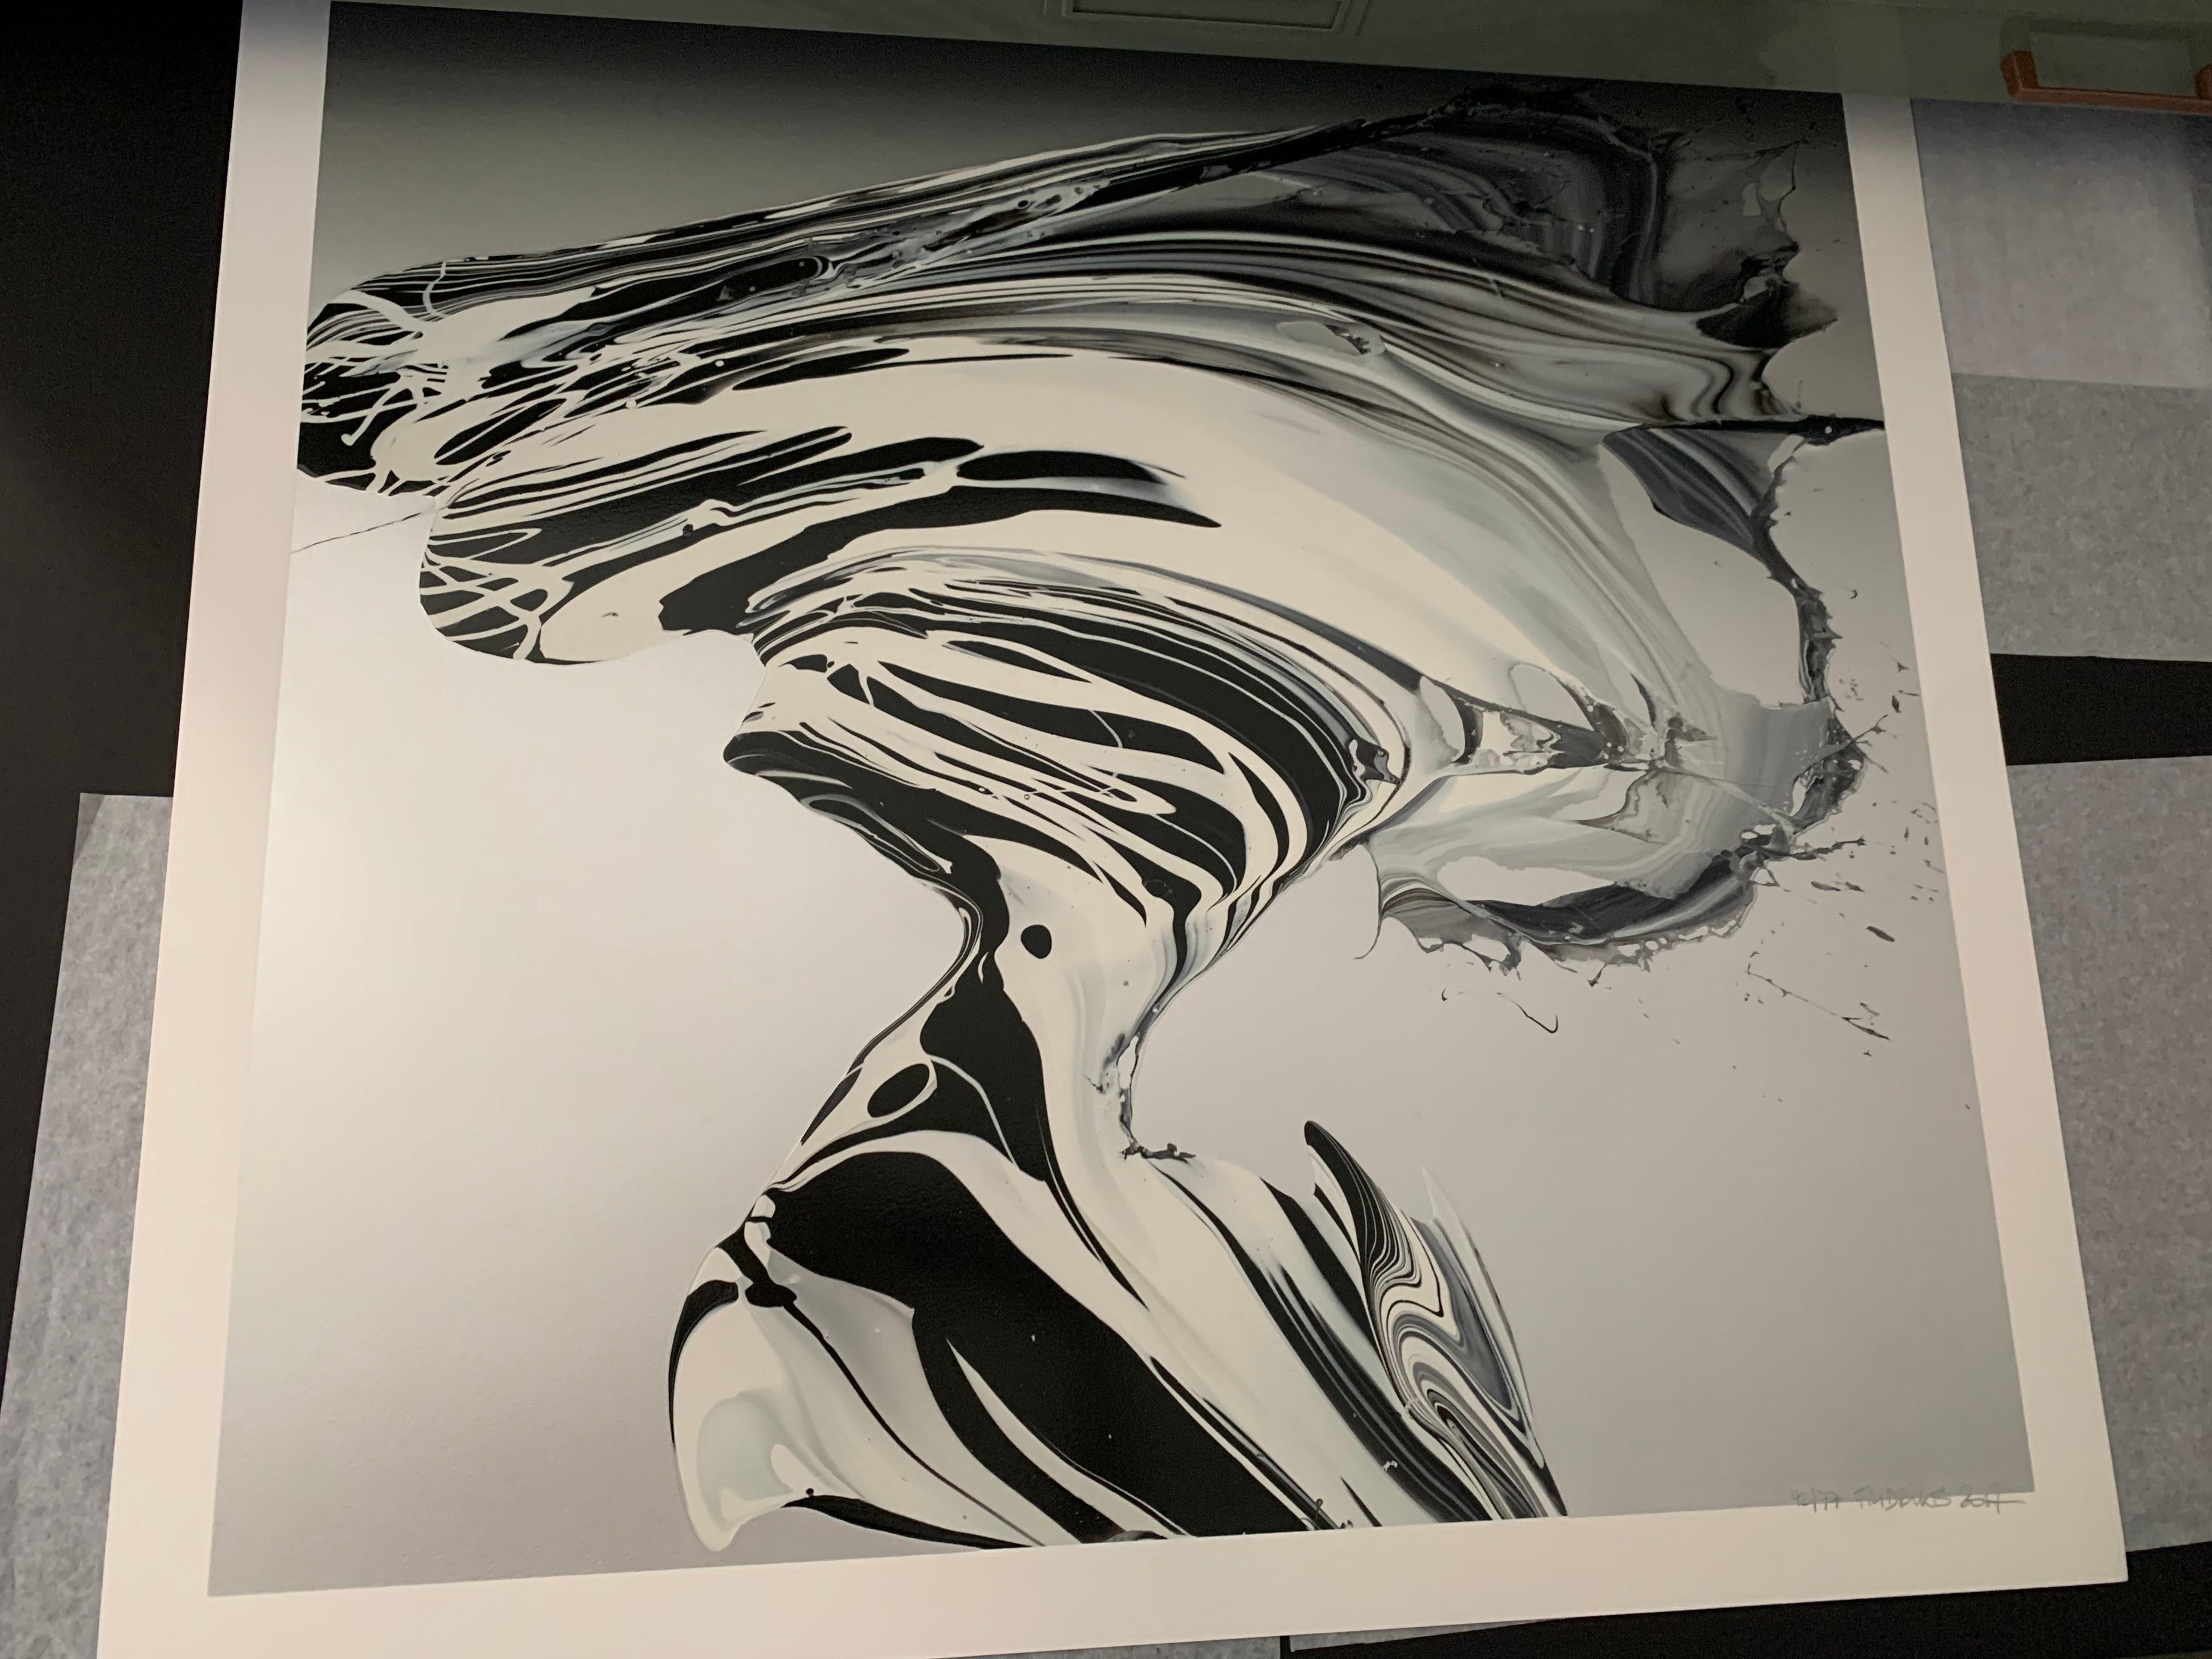 Introducing two stunning limited edition prints by Icelandic artist Katrin Fridriks. Each print is an edition of 77, with matching numbers and dimensions of 85cm x 85cm. Printed on Somerset Enhanced paper using techniques such as mixed screenprint,